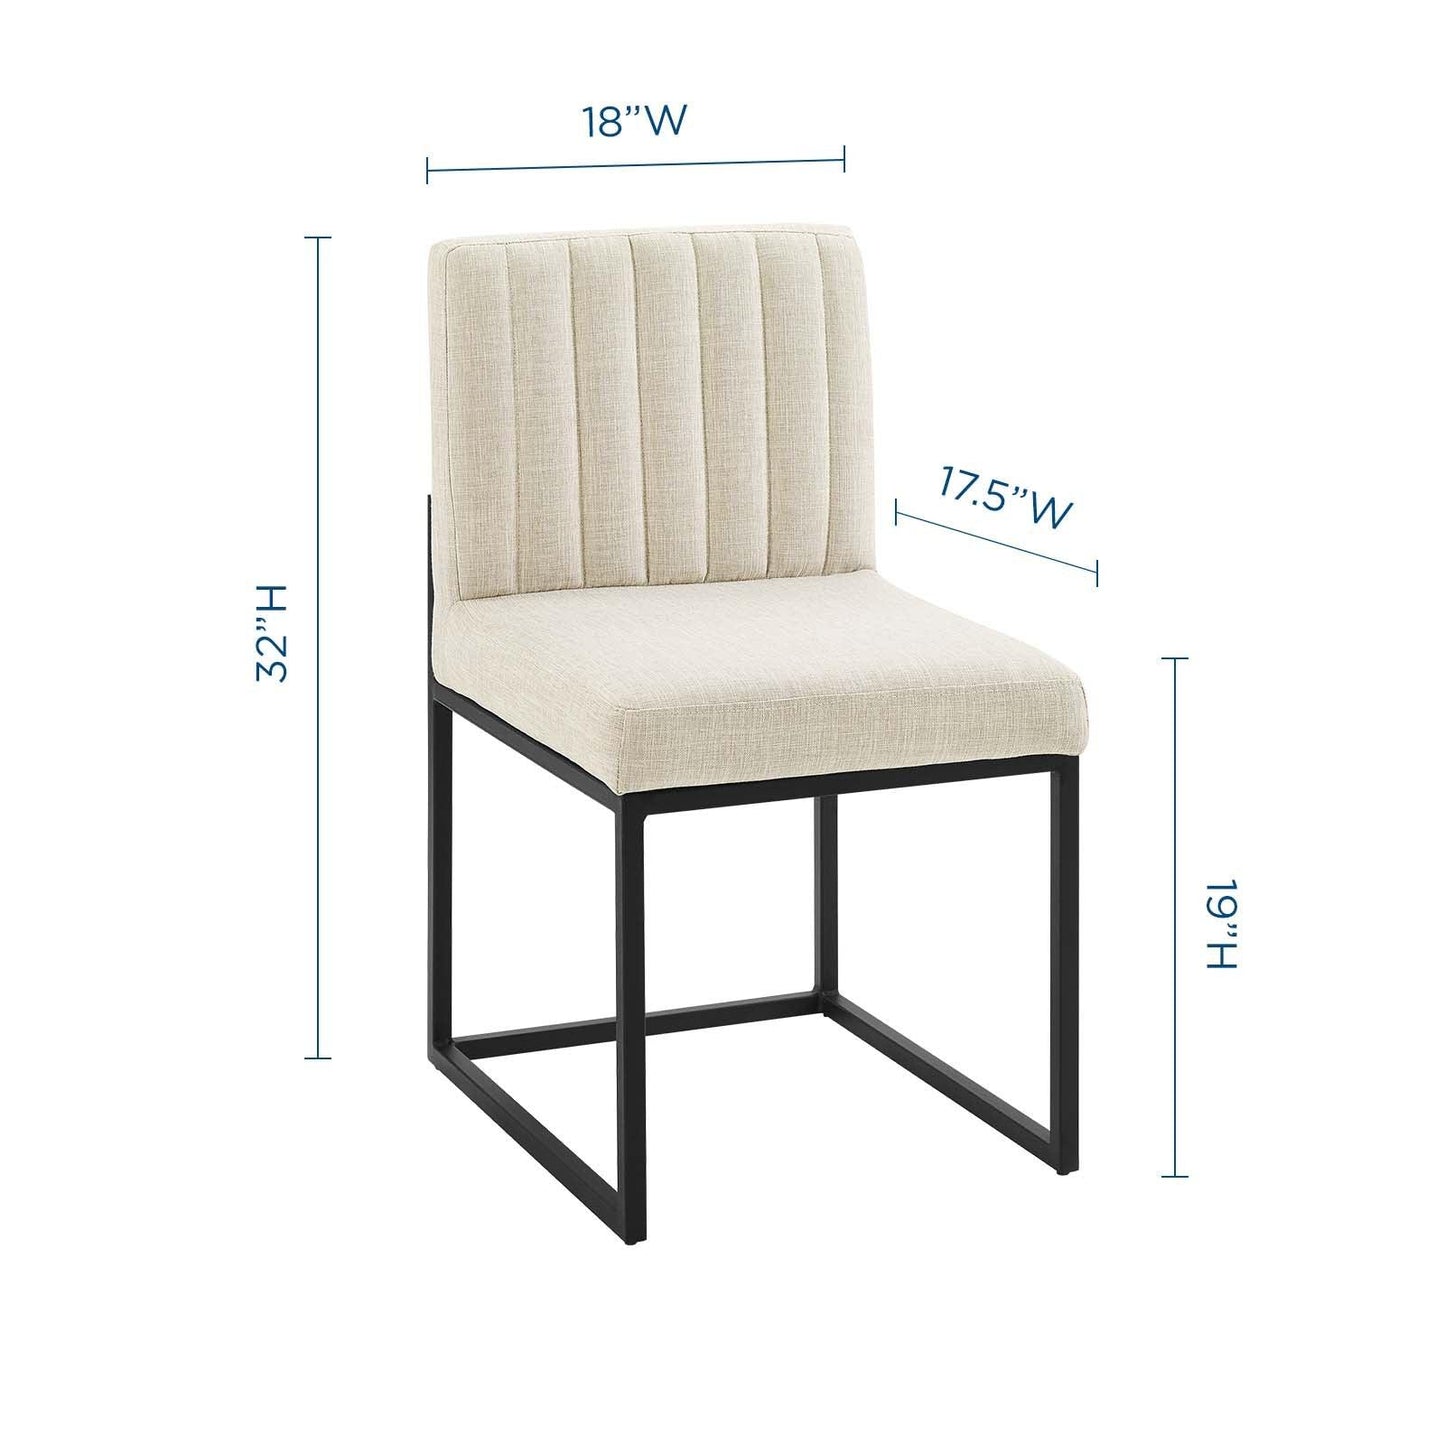 Modway Carriage Channel Tufted Sled Base Upholstered Fabric Dining Chair FredCo